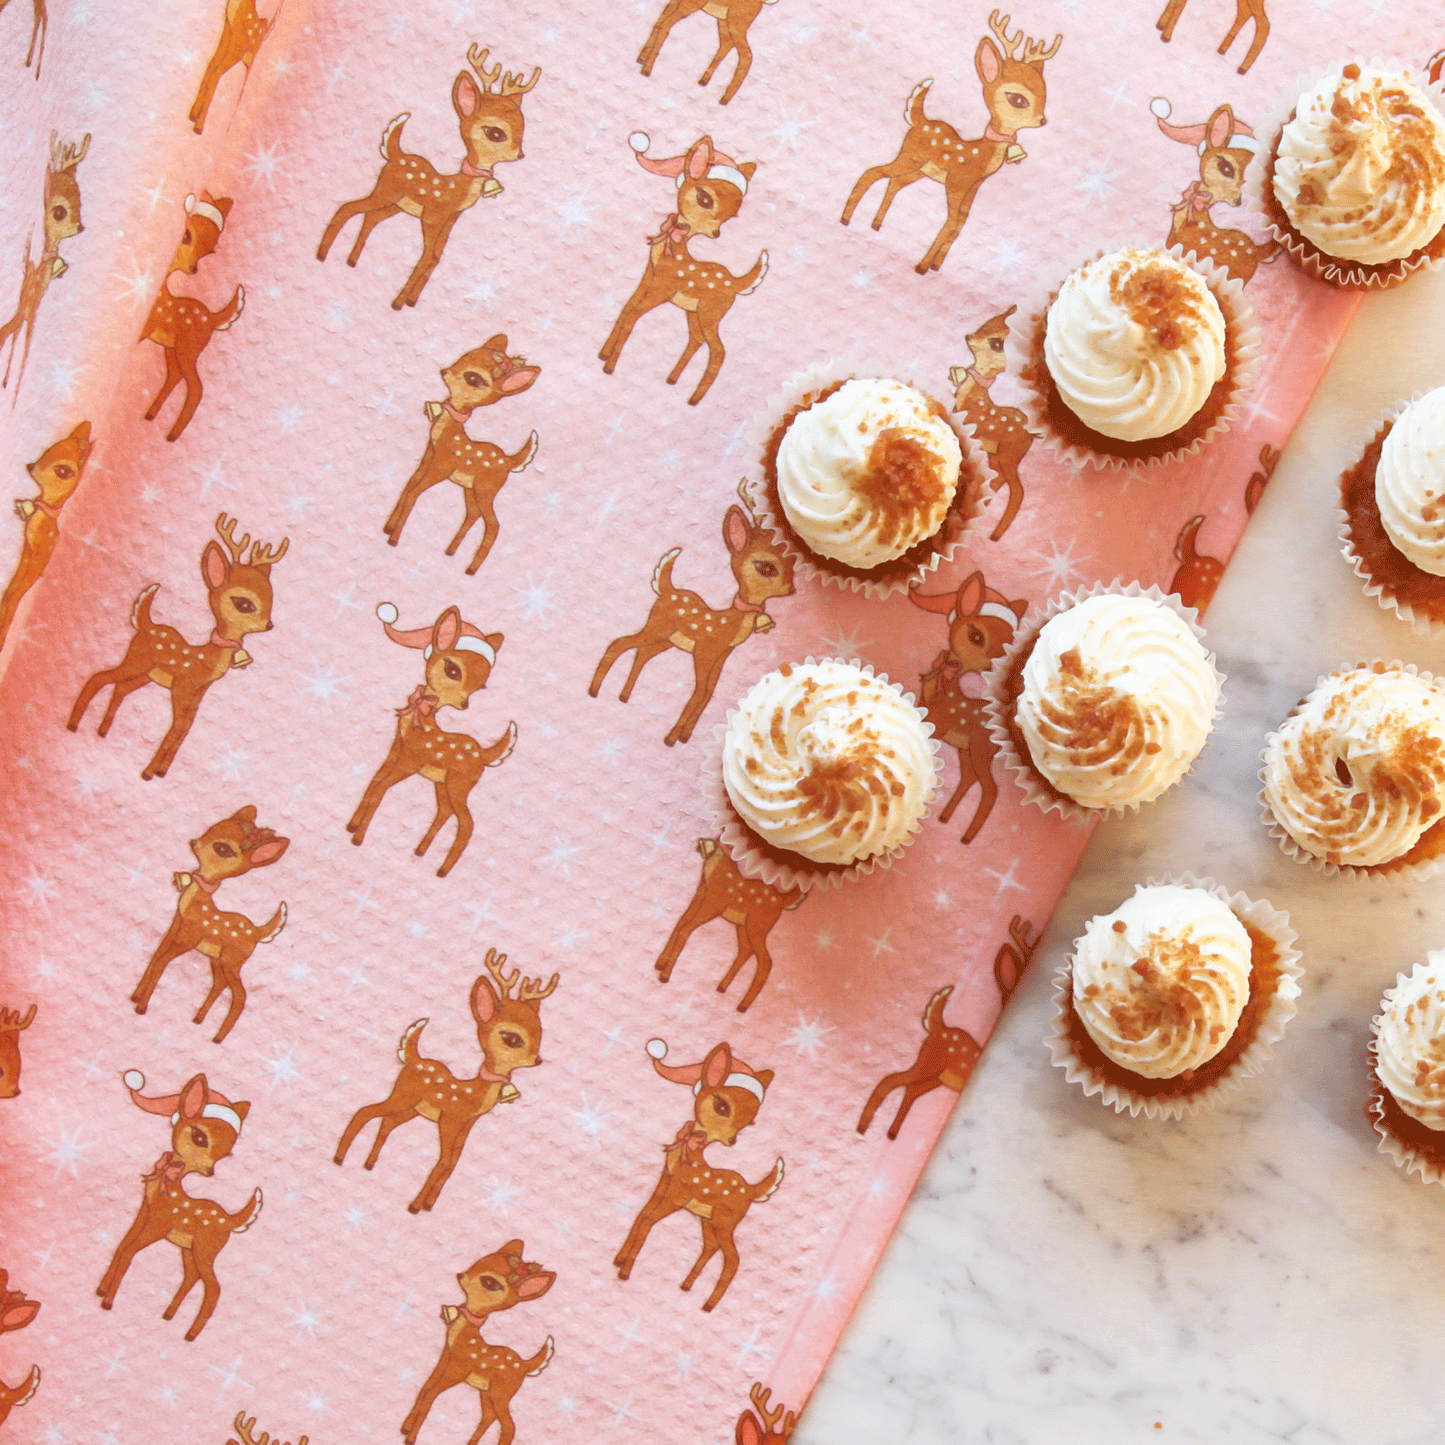 A pink kitchen towel with a brown retro deer pattern and staged next to white frosted cupcakes. 